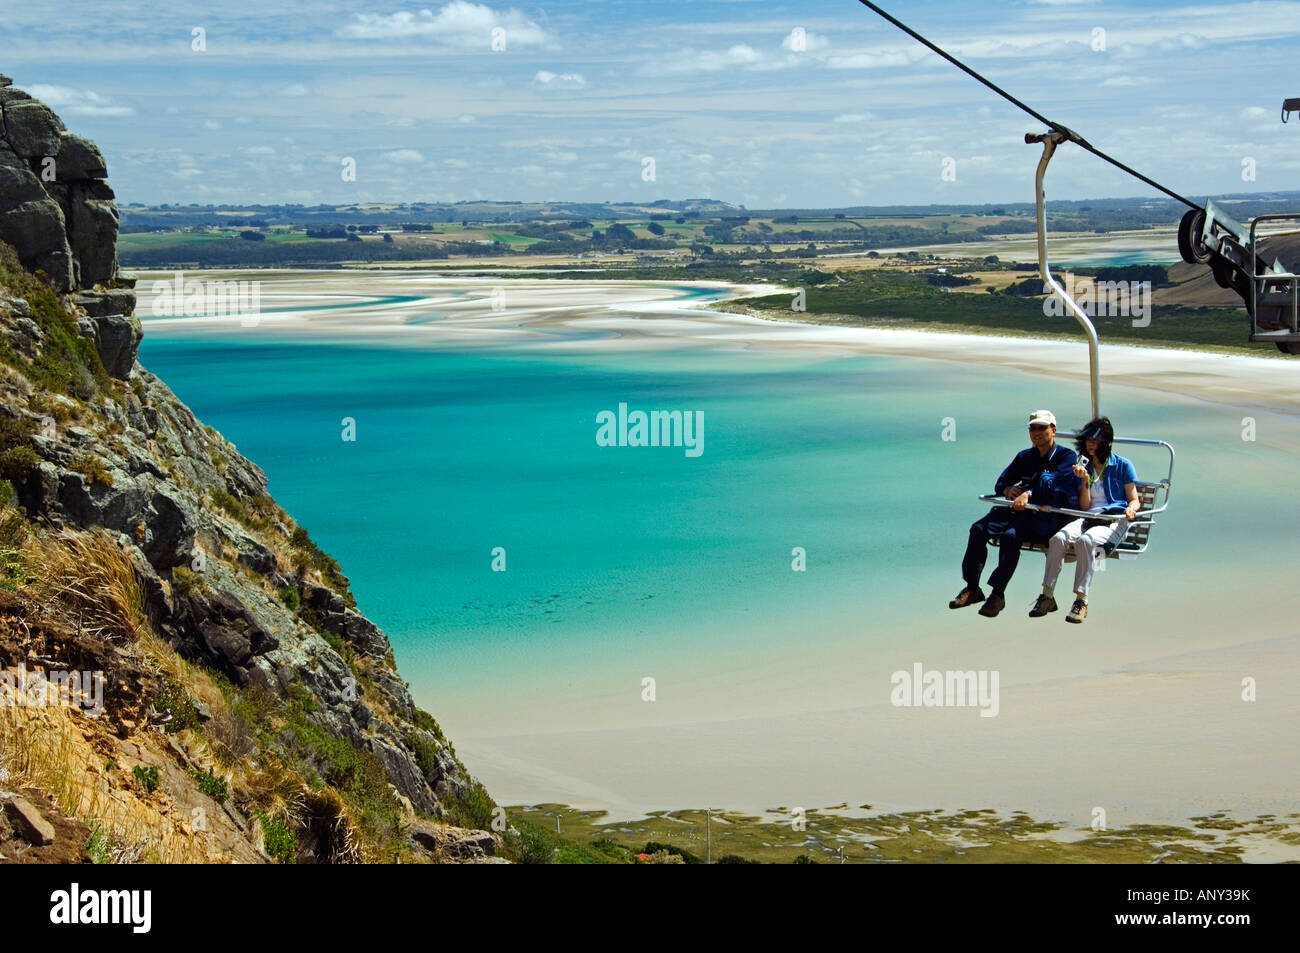 Australia, Tasmania, Stanley, Sawyer Bay. Visitors on the chair lift going to The Nut at Circular Head. Stock Photo